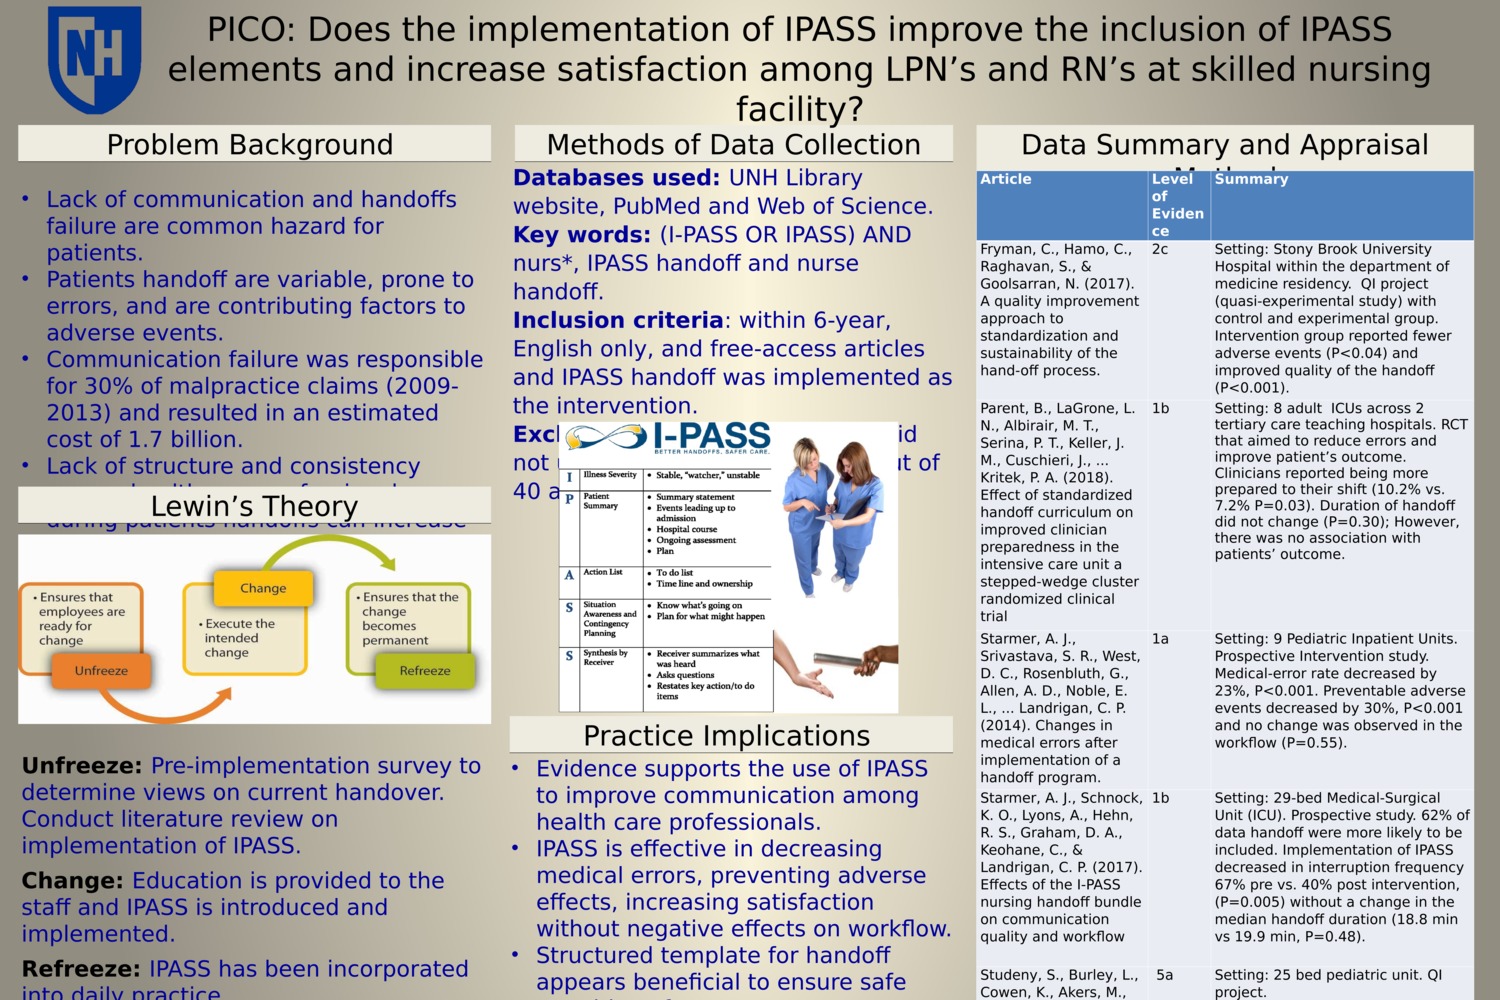 Pico: Does The Implementation Of Ipass Improve The Inclusion Of Ipass Elements And Increase Satisfaction Among Lpn’S And Rn’S At Skilled Nursing Facility? by egv24